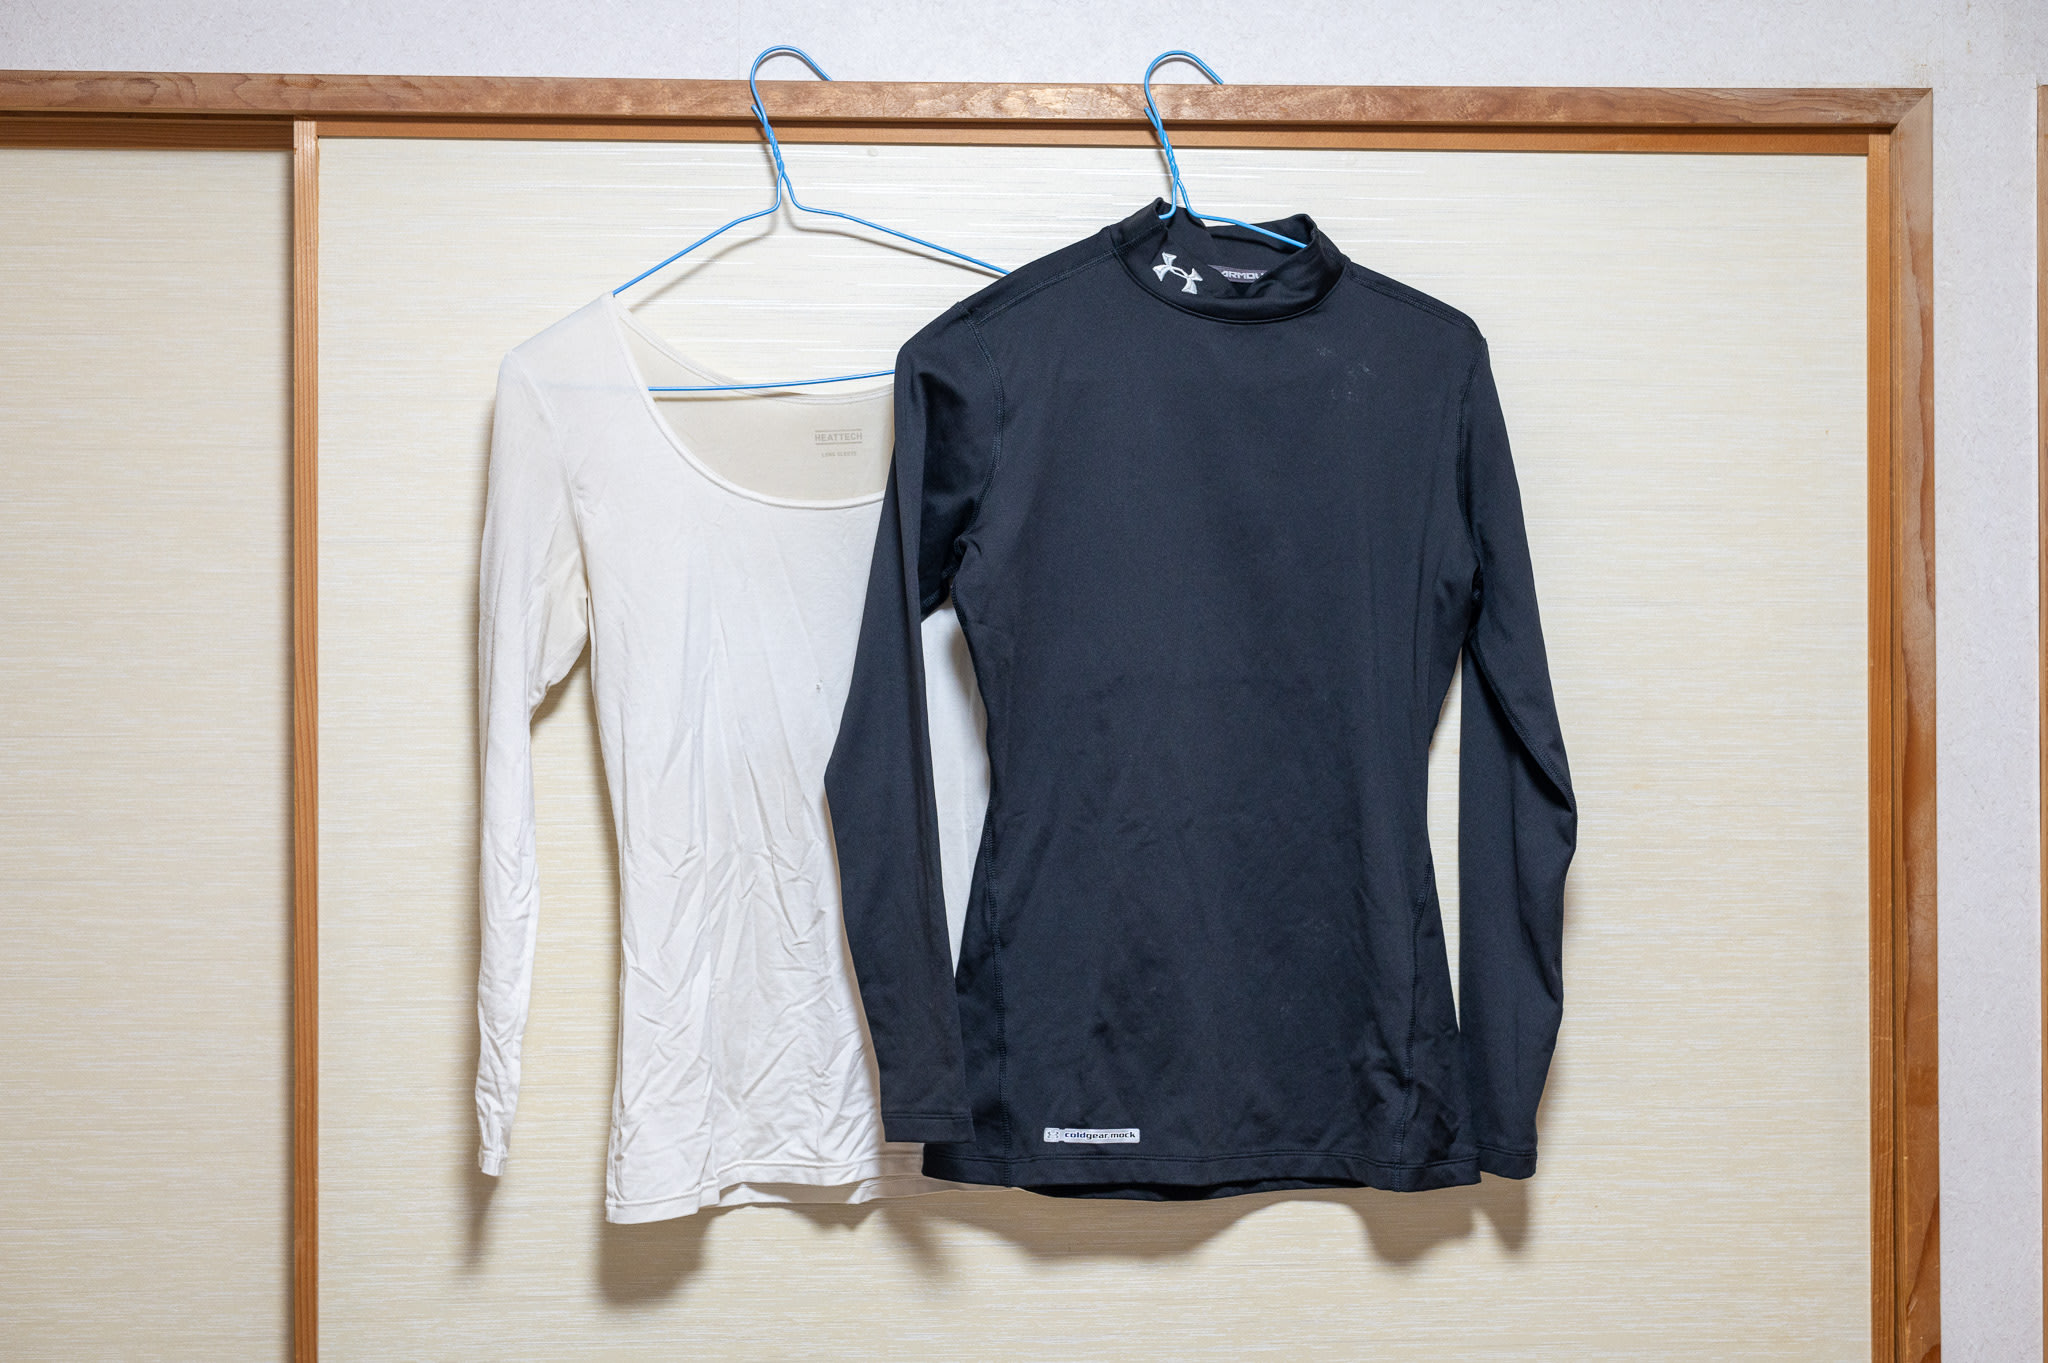 Two thermal tops on hangers against a closet. One is high-necked, the other is a scoop-neck.